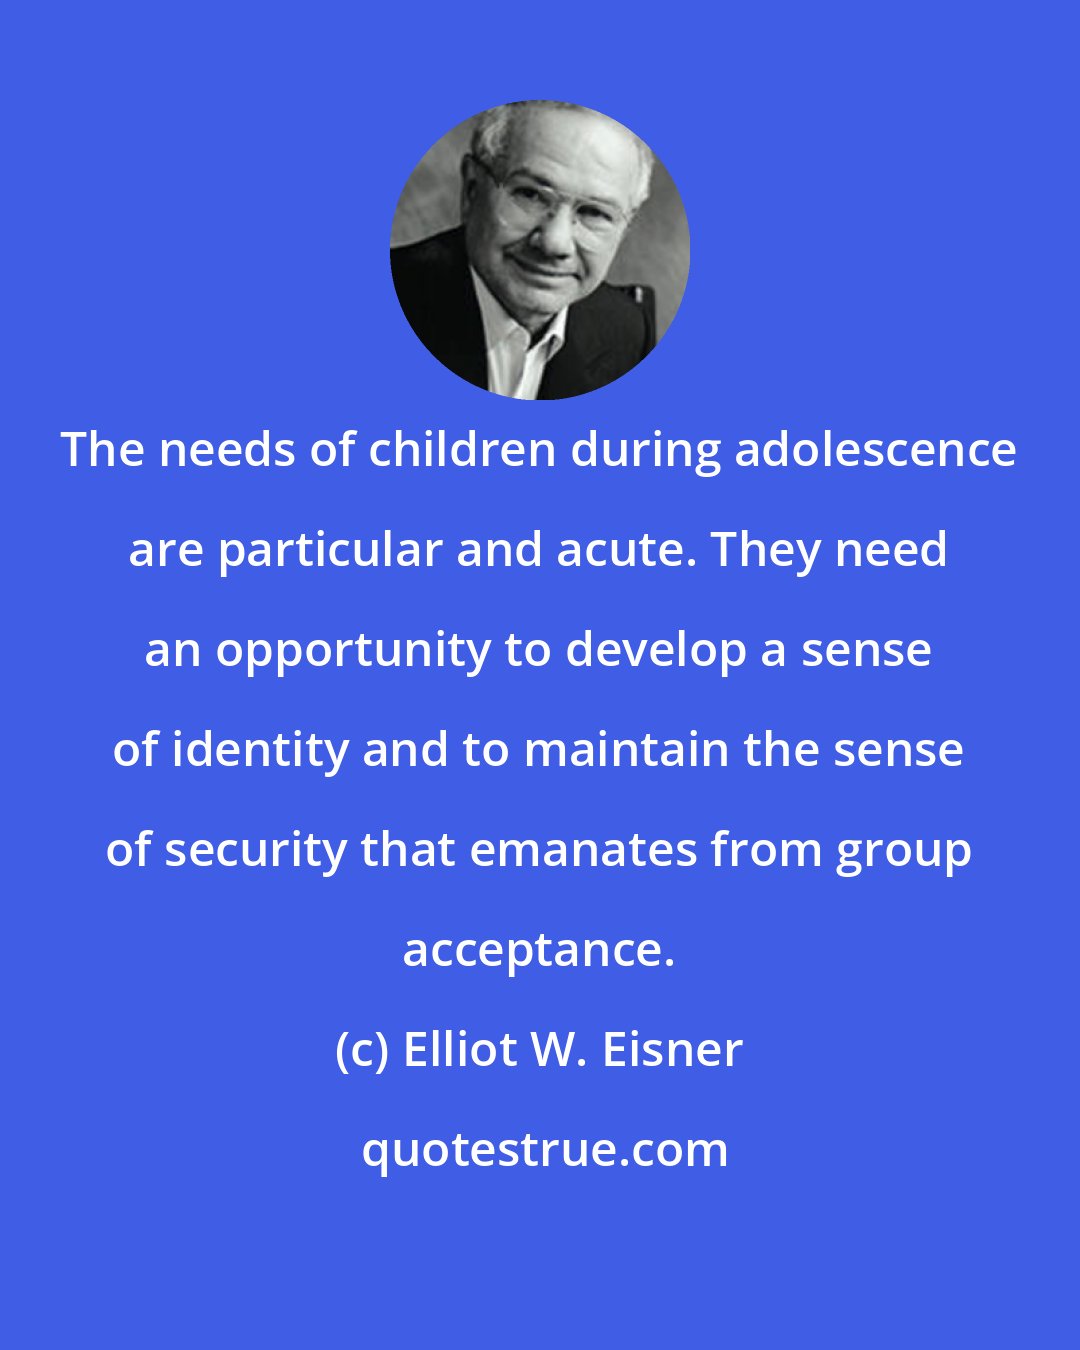 Elliot W. Eisner: The needs of children during adolescence are particular and acute. They need an opportunity to develop a sense of identity and to maintain the sense of security that emanates from group acceptance.